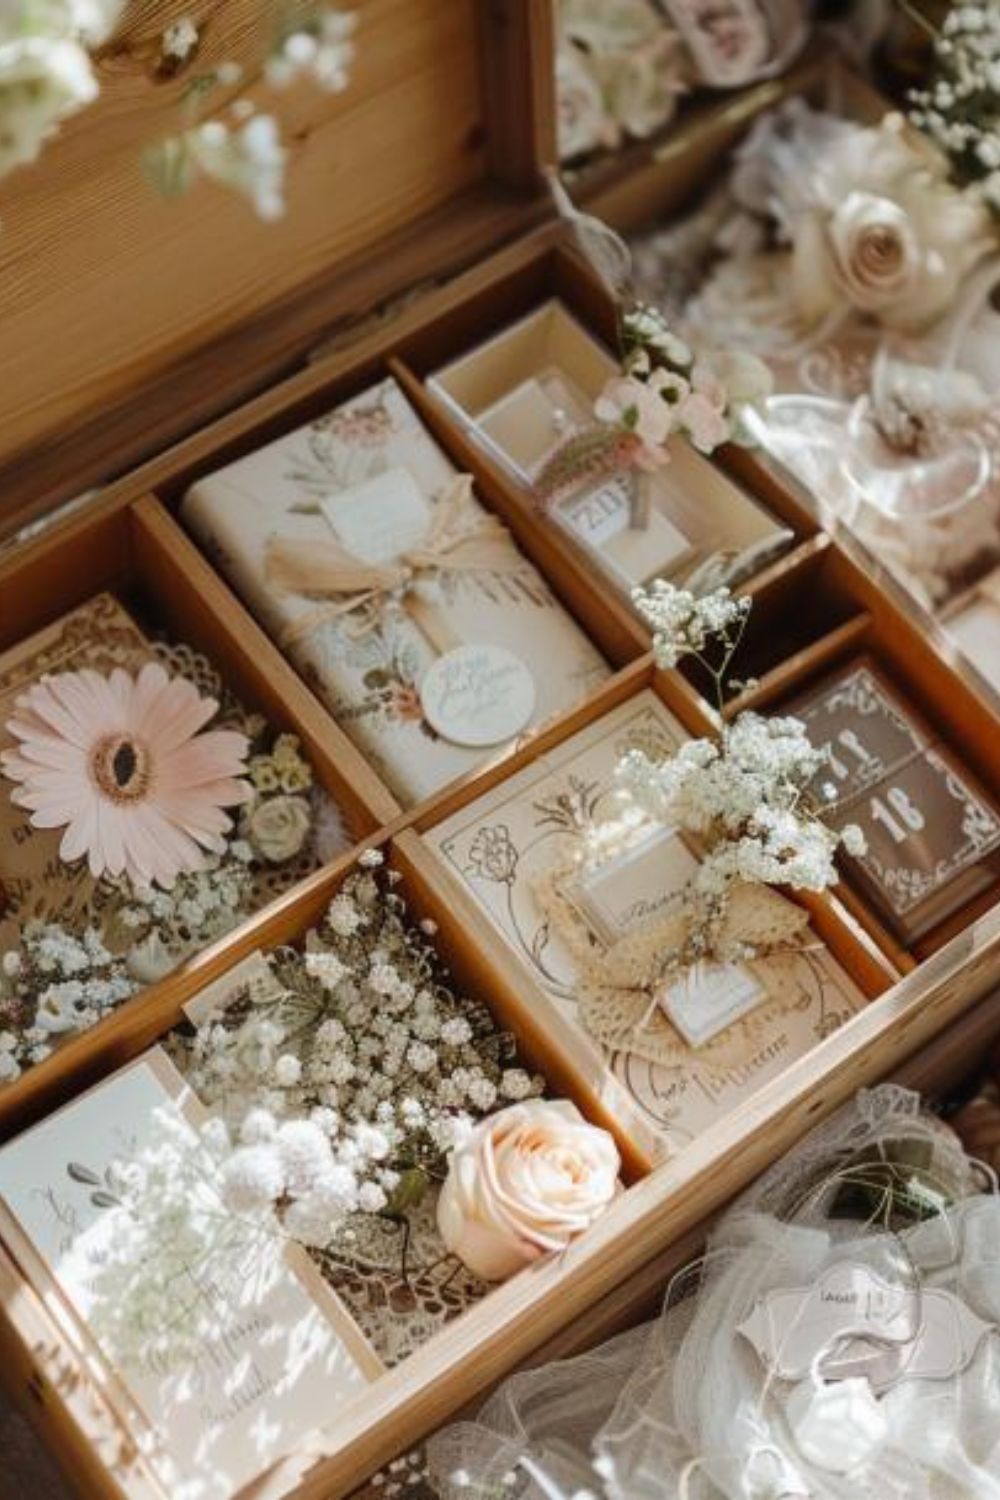 What_You_Can_Store_in_Your_Wedding_Keepsake_Box_I_Wedding_Keepsake_Boxes_I_Make_Memento